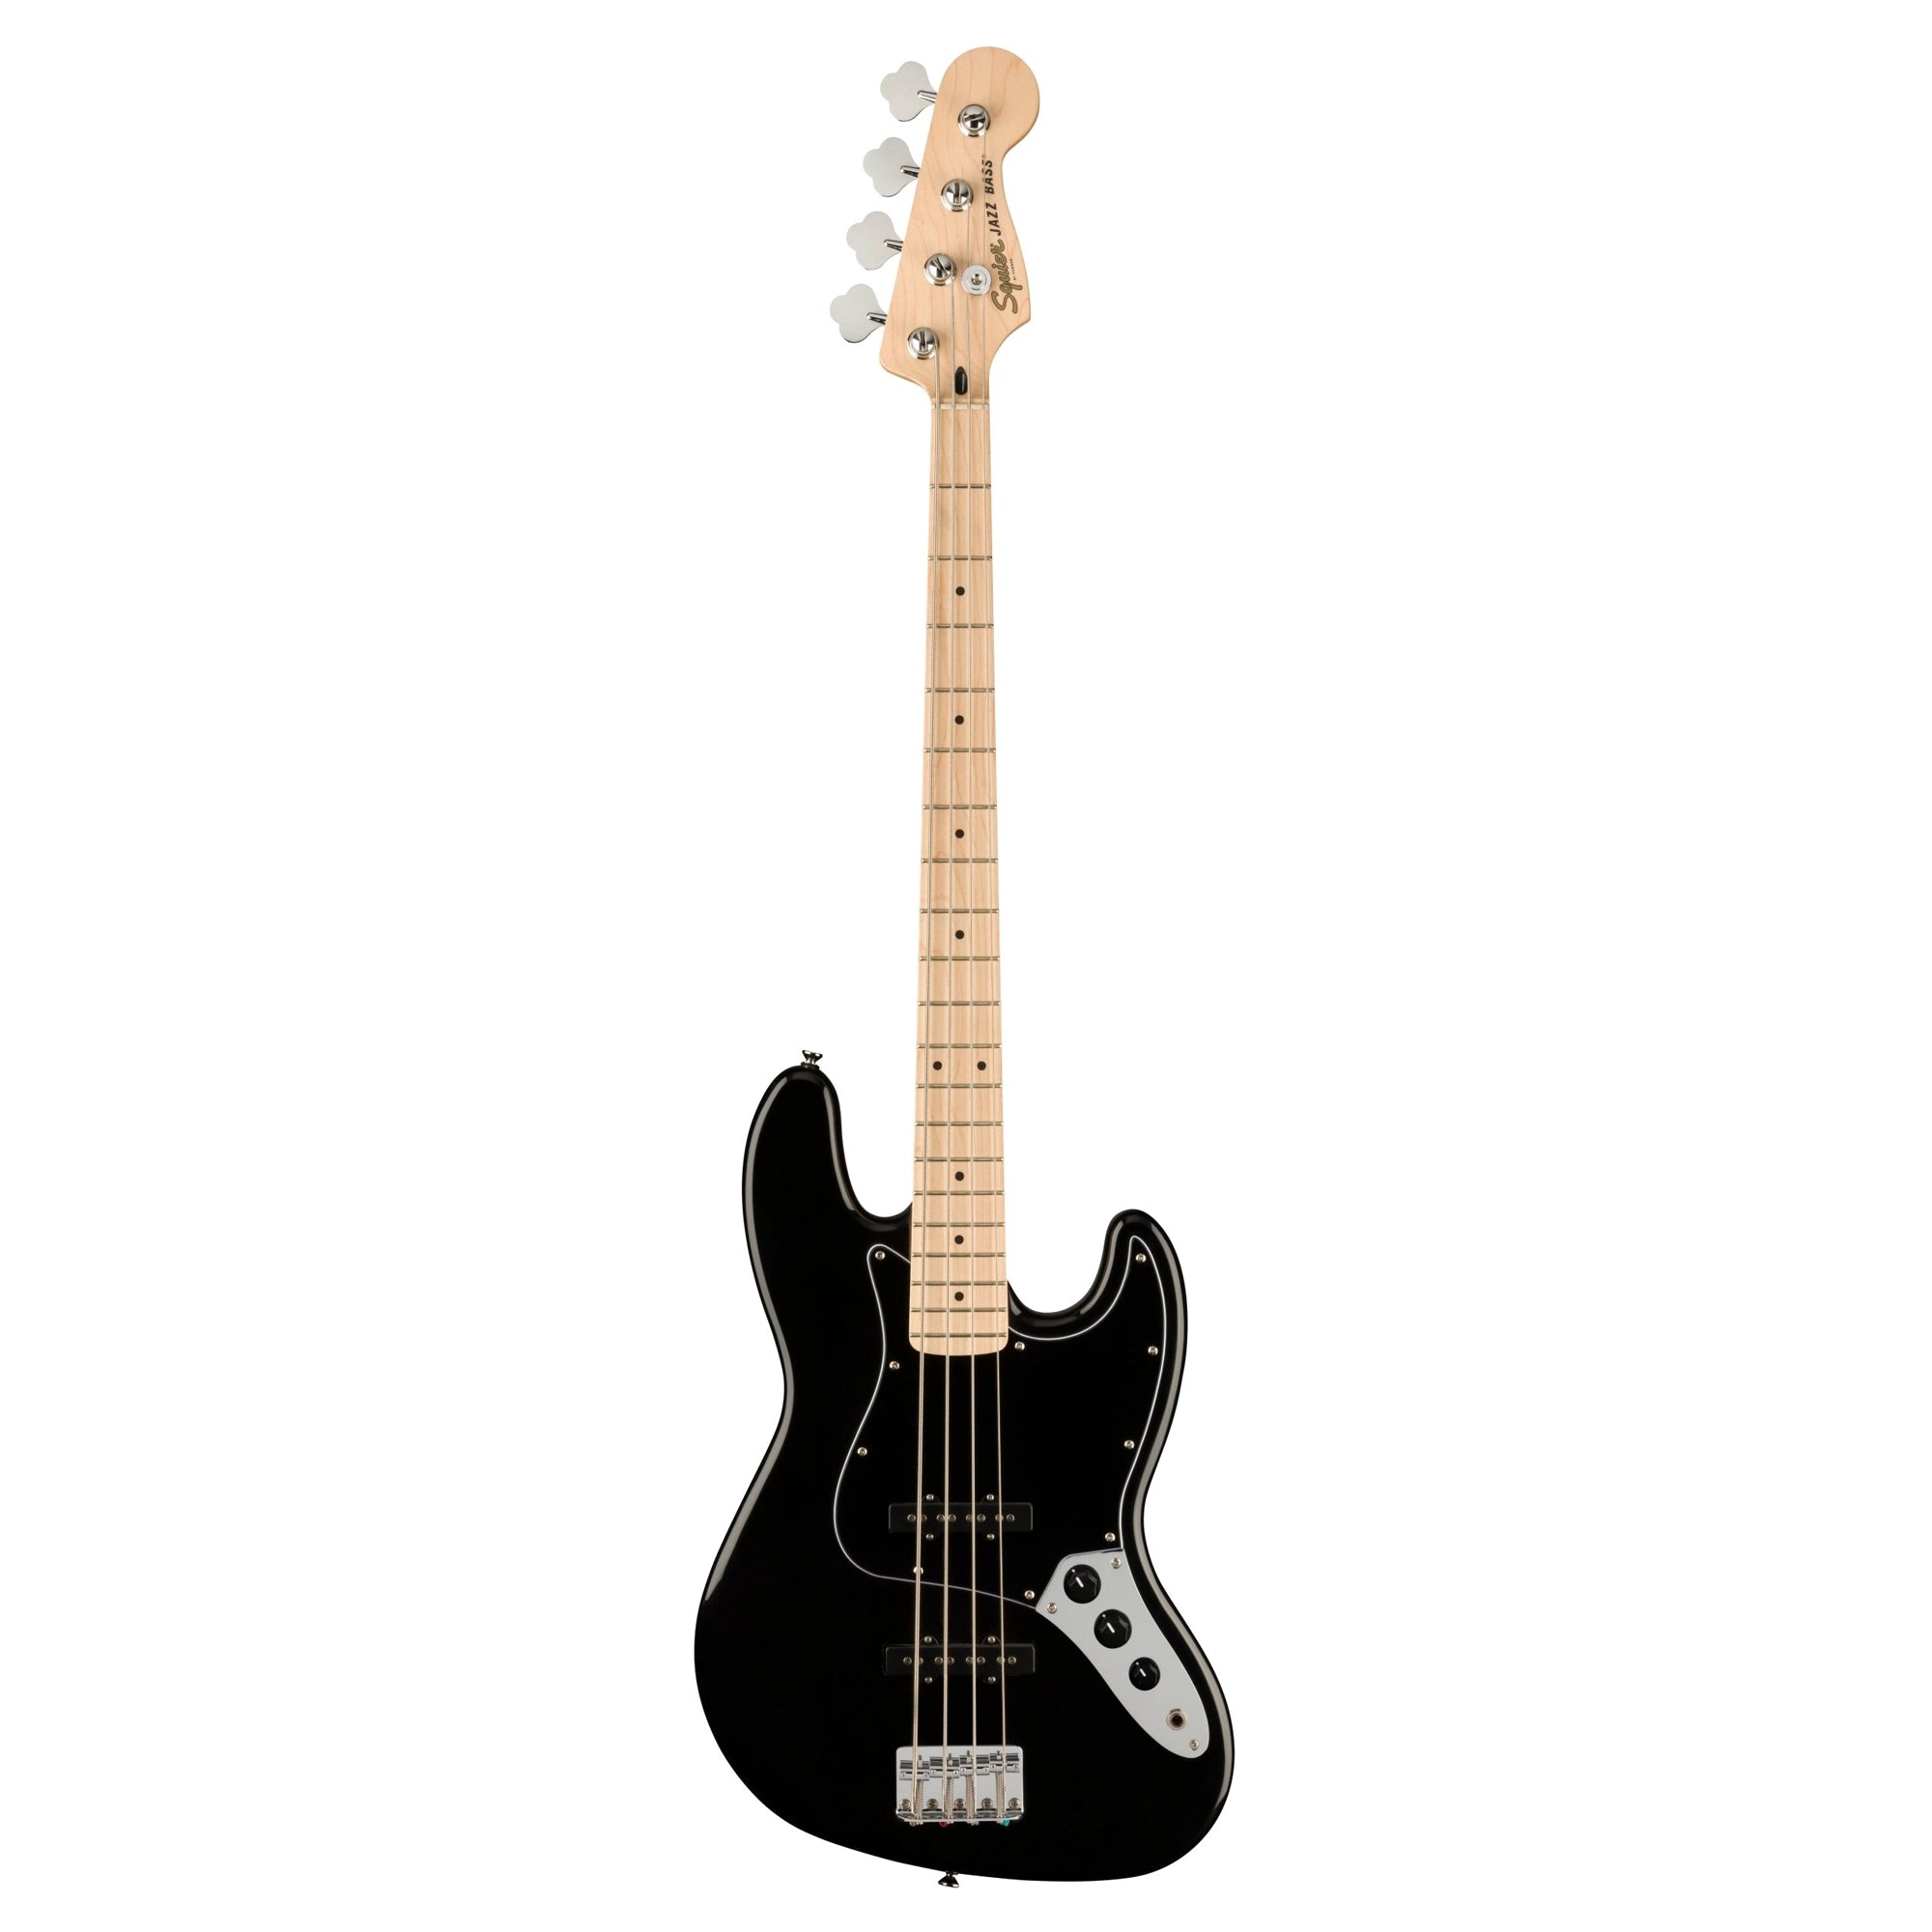 Squier Affinity Series Jazz Electric Bass - Black